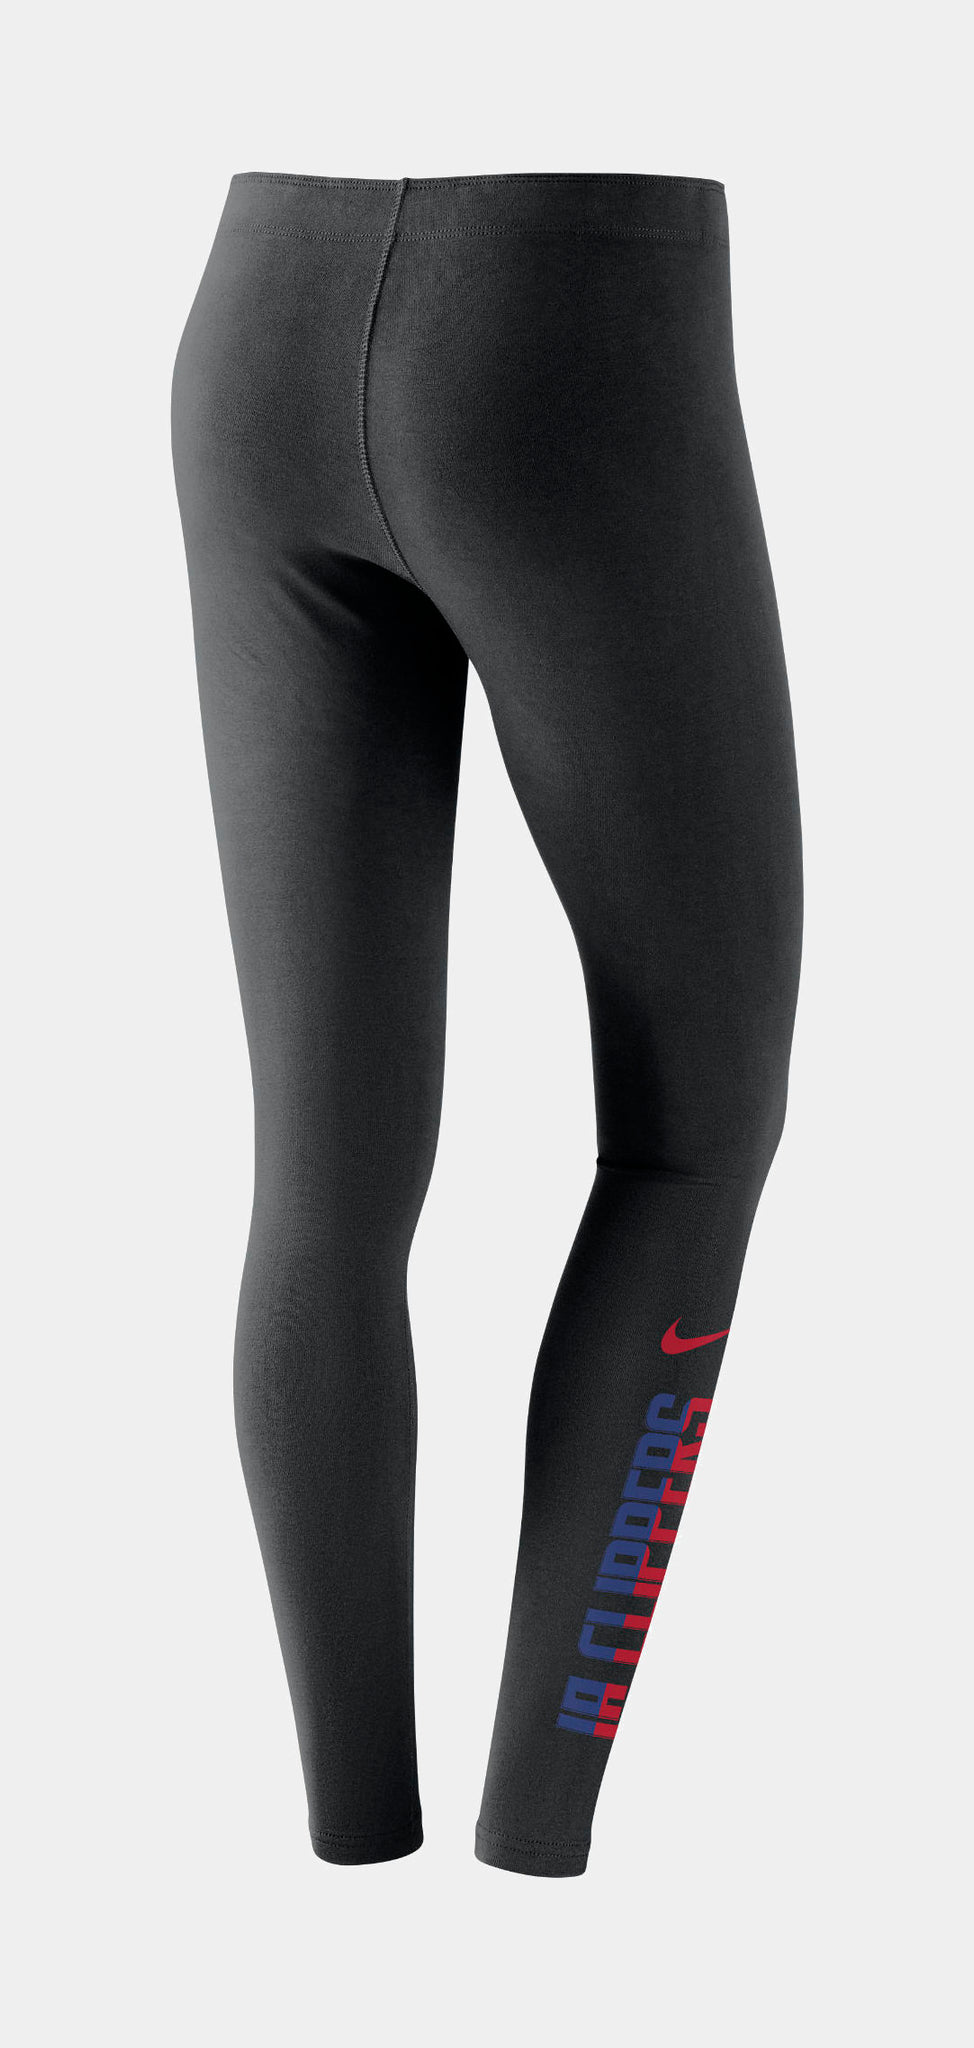 Nike Los Angeles Clippers NBA Womens Tights Black 862538-010